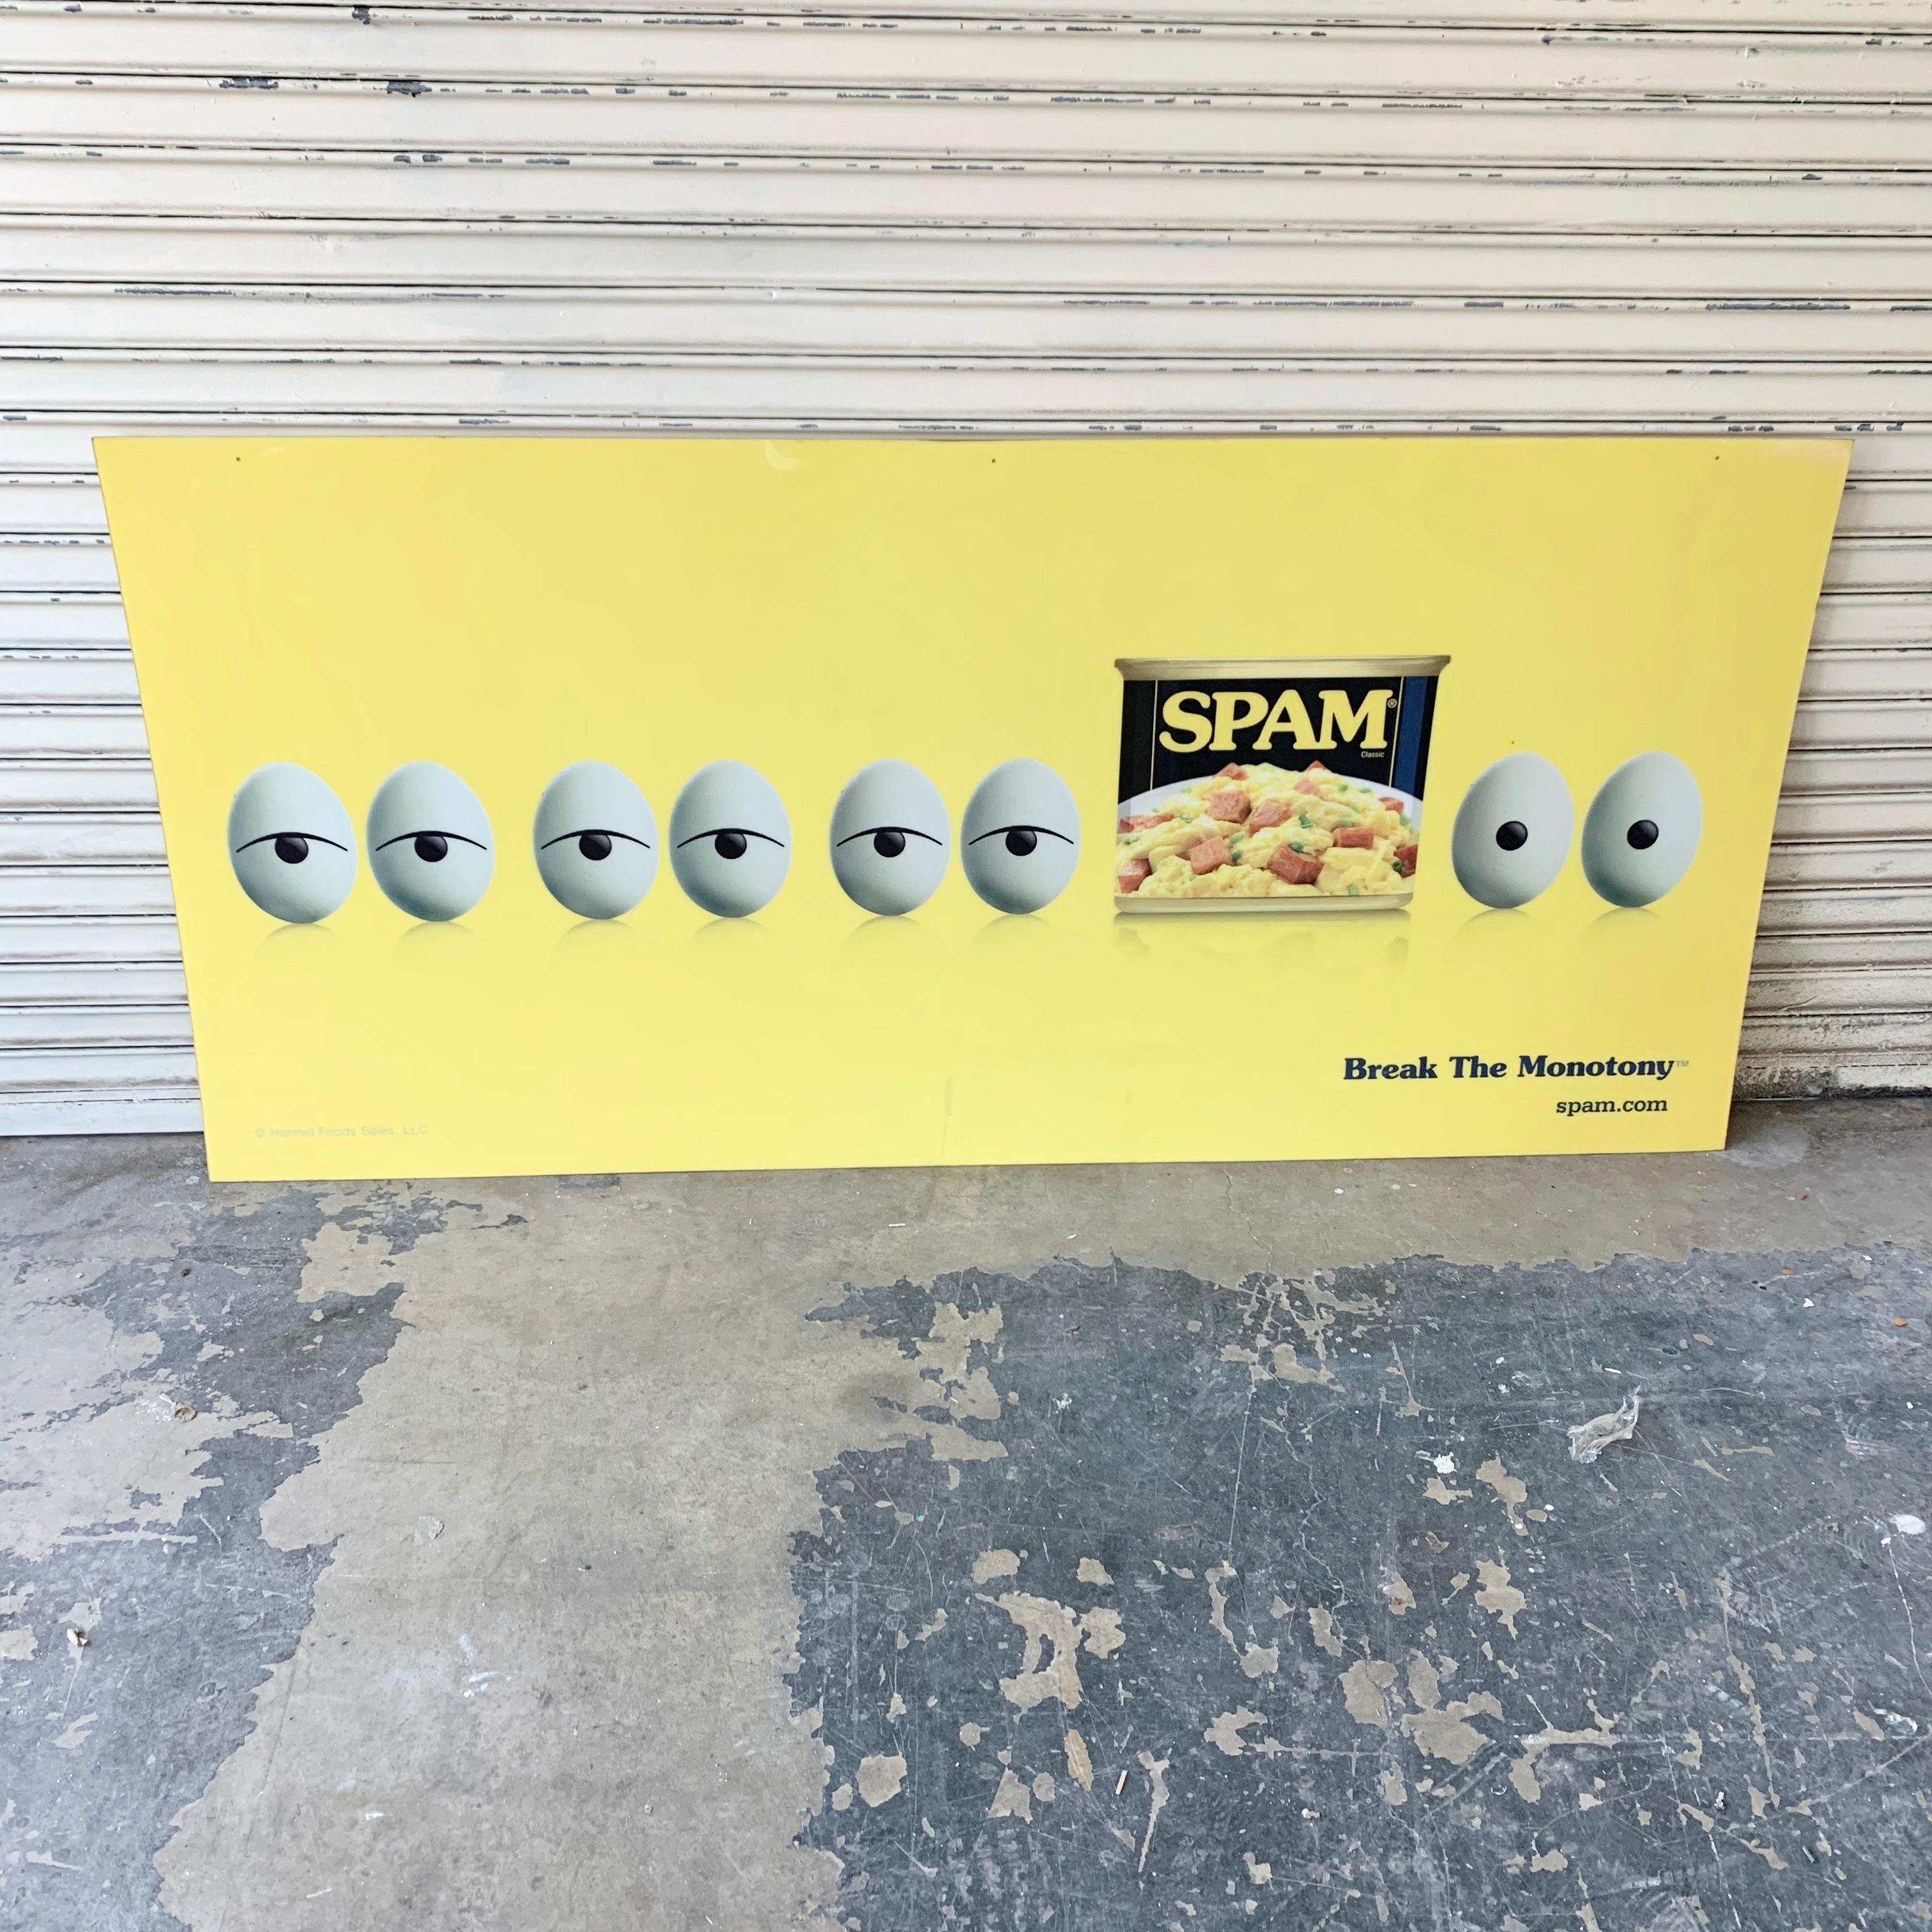 Massive advertising plastic board made by Hormel Foods LLC, makers of spam. Board is a canary yellow depicting a row of eyeballs (eggs) and then a can of SPAM. The tag line at the bottom says BREAK THE MONOTONY. Cool graphics, good condition. Size: